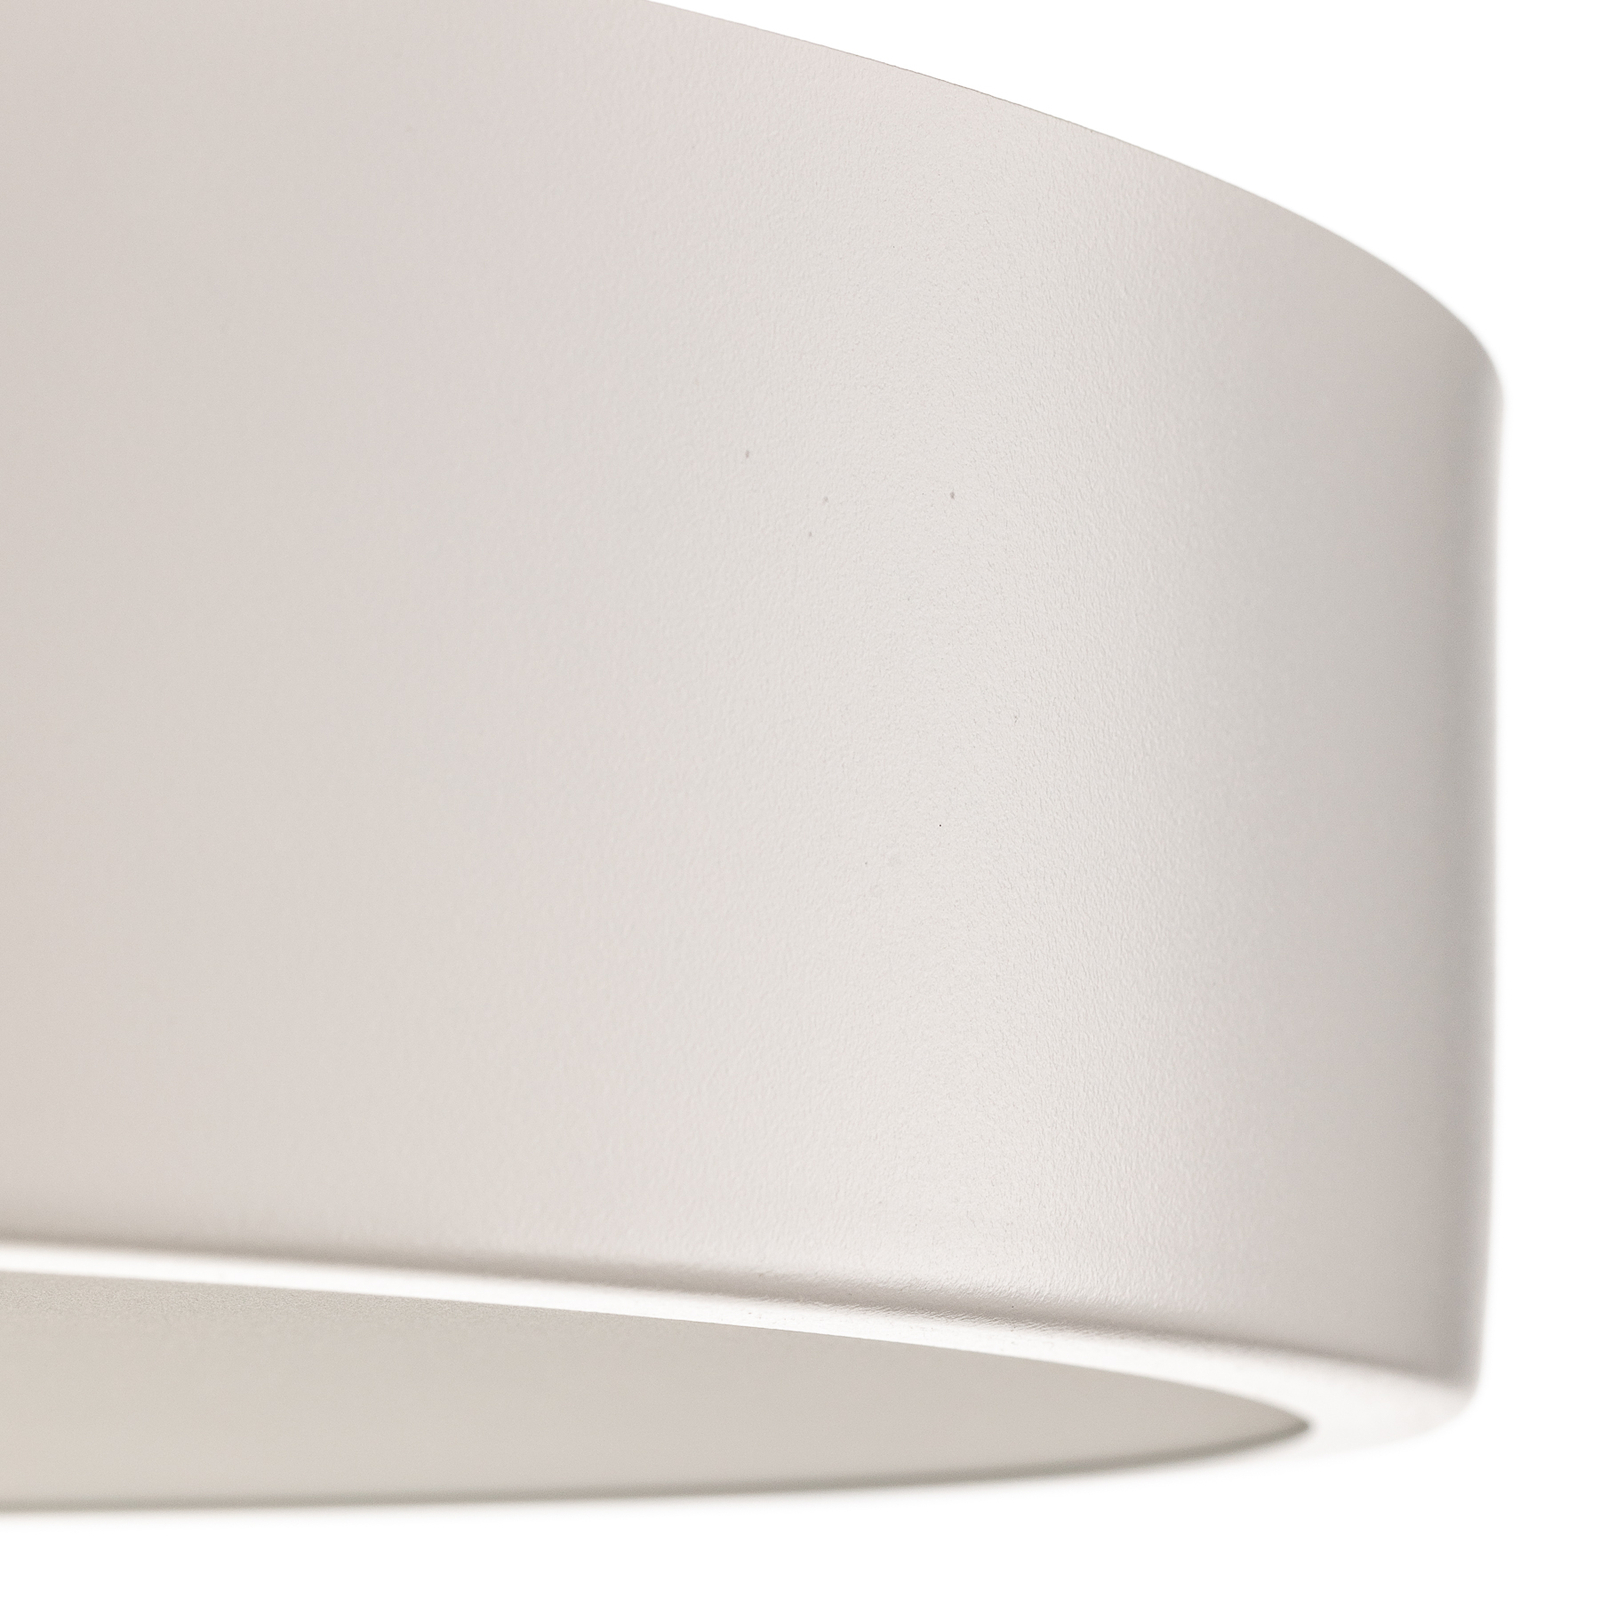 Cleo ceiling lamp in white with diffuser, Ø 60 cm